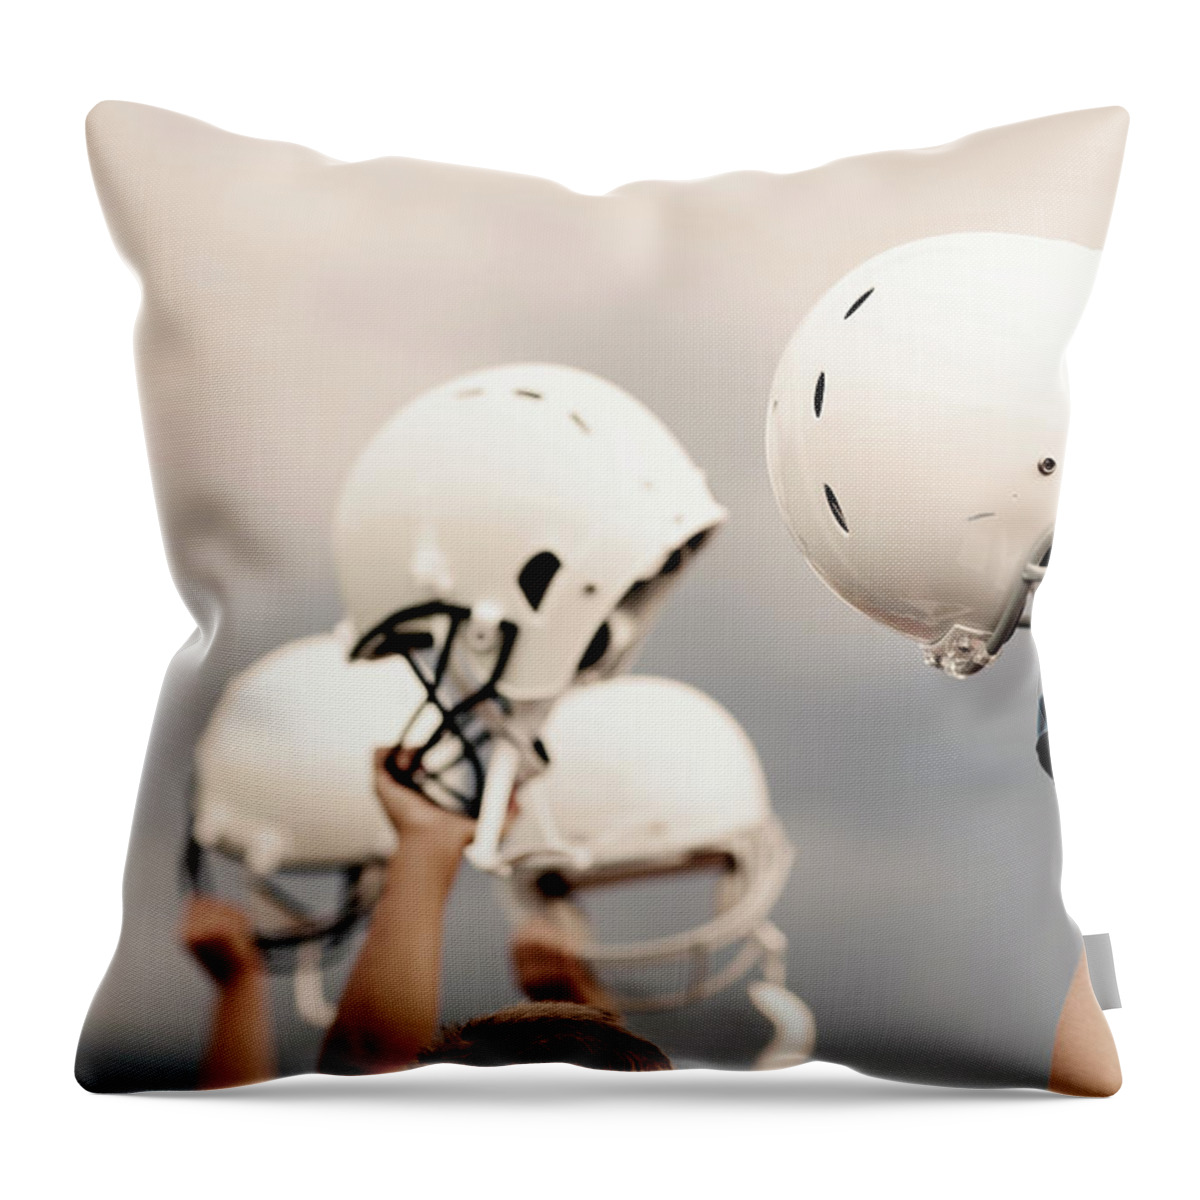 Sports Helmet Throw Pillow featuring the photograph Victory by Richvintage